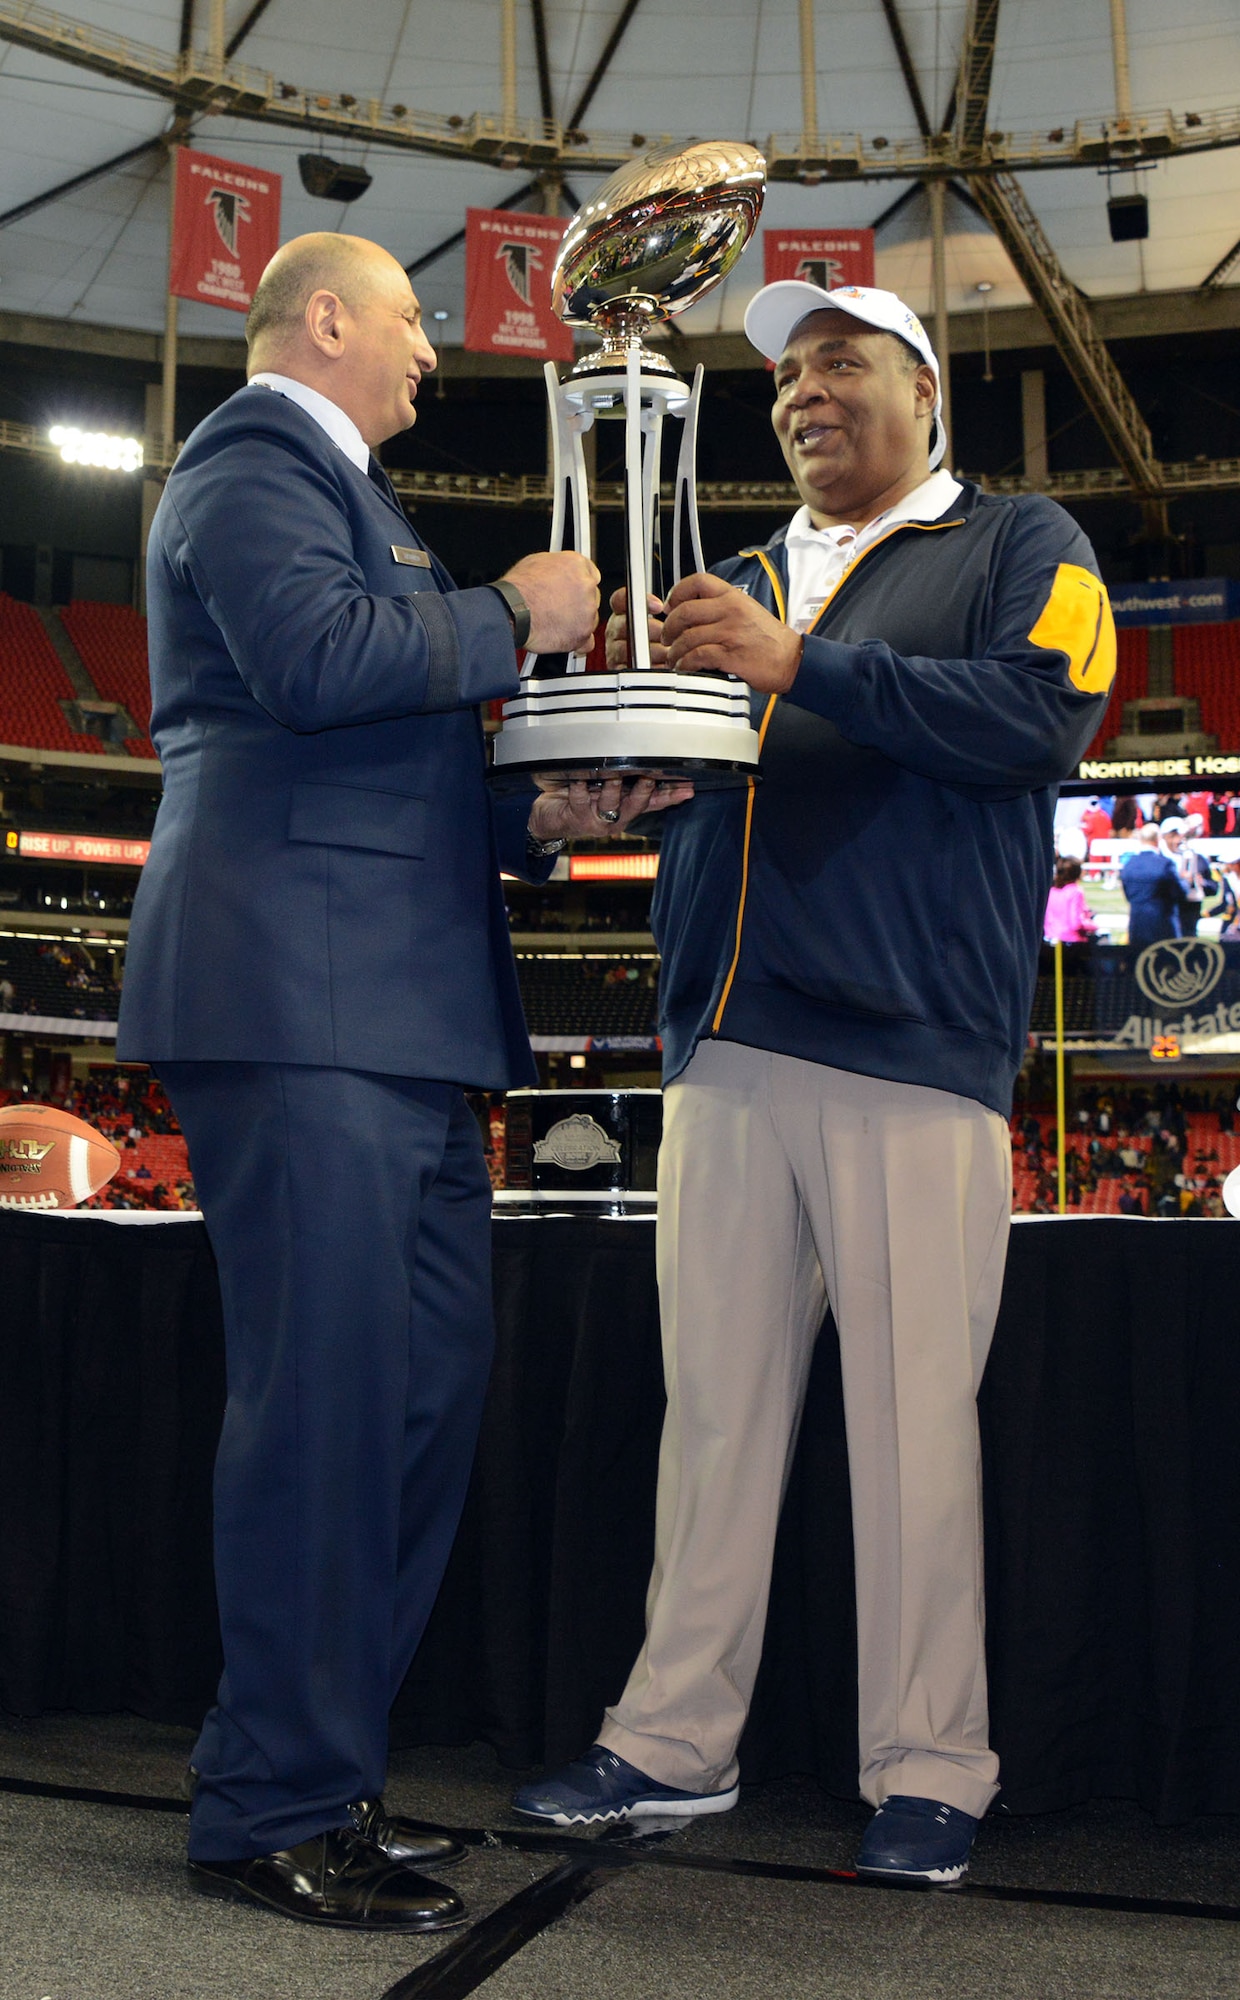 Maj Gen Richard S. Haddad hands out the Air Force Reserve Celebration Bowl championship trophy to North Carolina A&T head coach Rod Broadway. North Carolina A&T won the thriller 41-34 over Alcorn State in the  at the Georgia Dome. (Air Force photo/Master Sgt. Chance Babin)